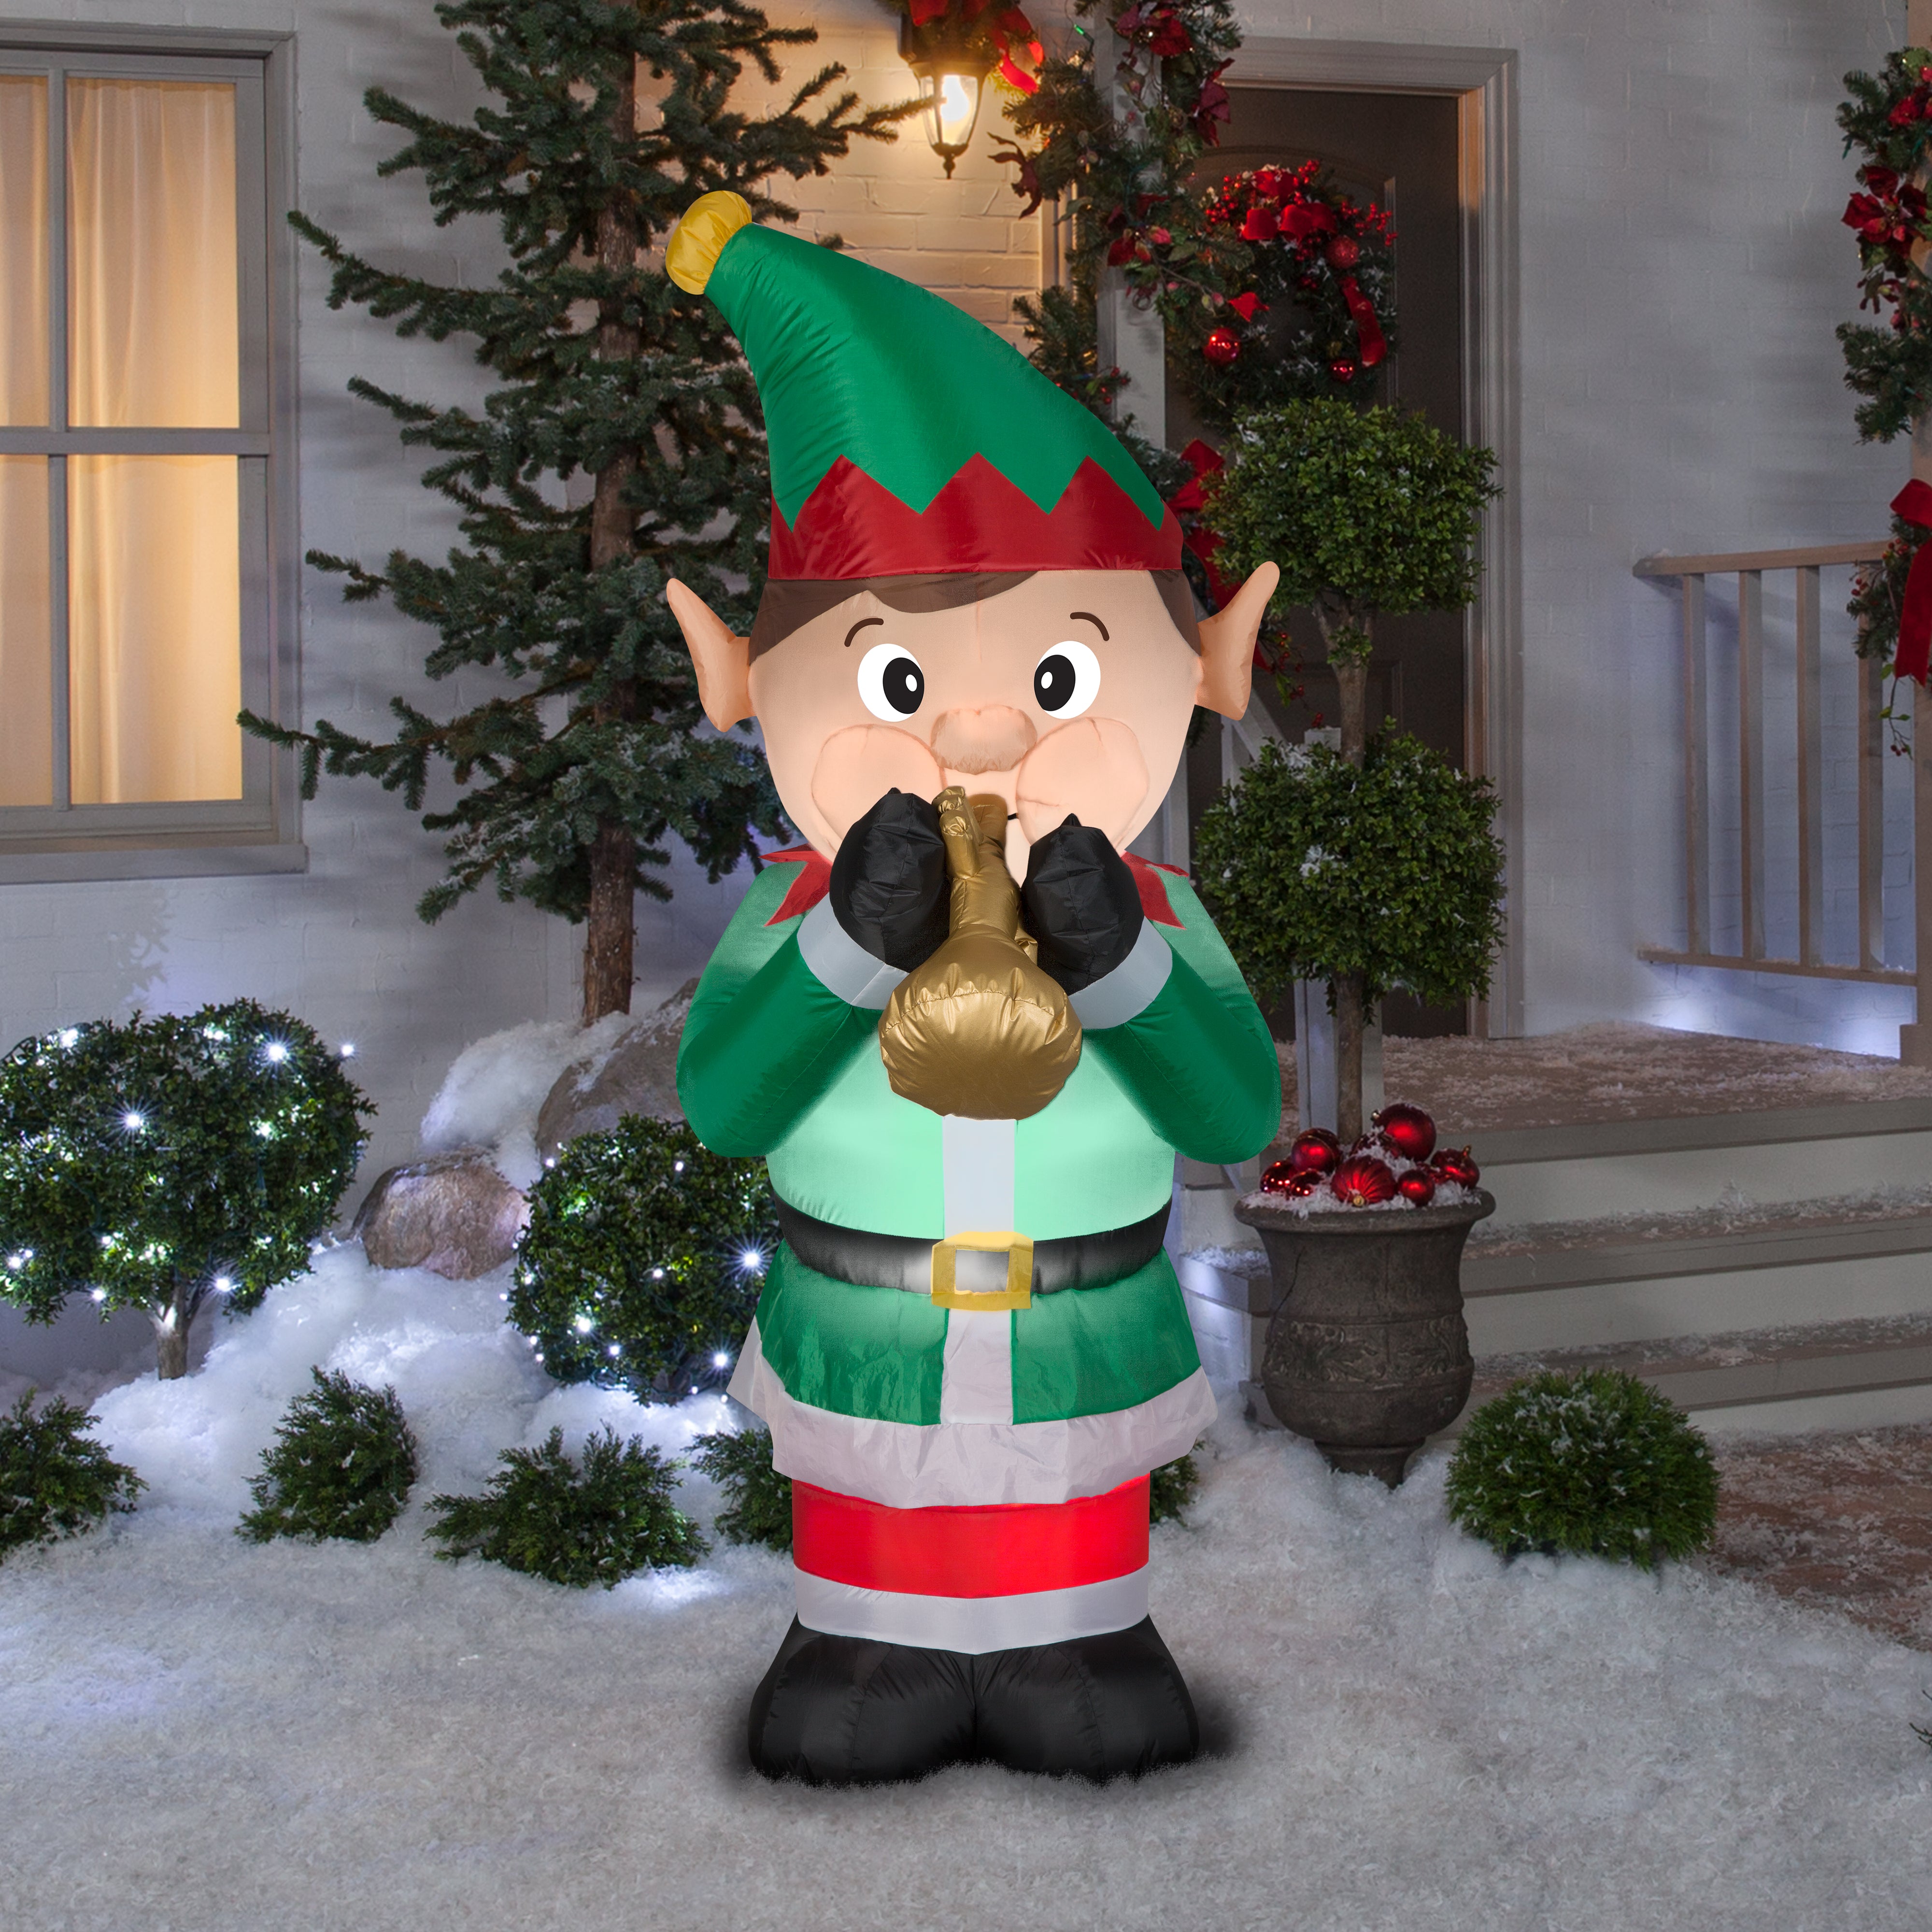 Gemmy Animated Christmas Airblown Inflatable Mixed Media Elf Playing Trumpet, 4 ft Tall, Green